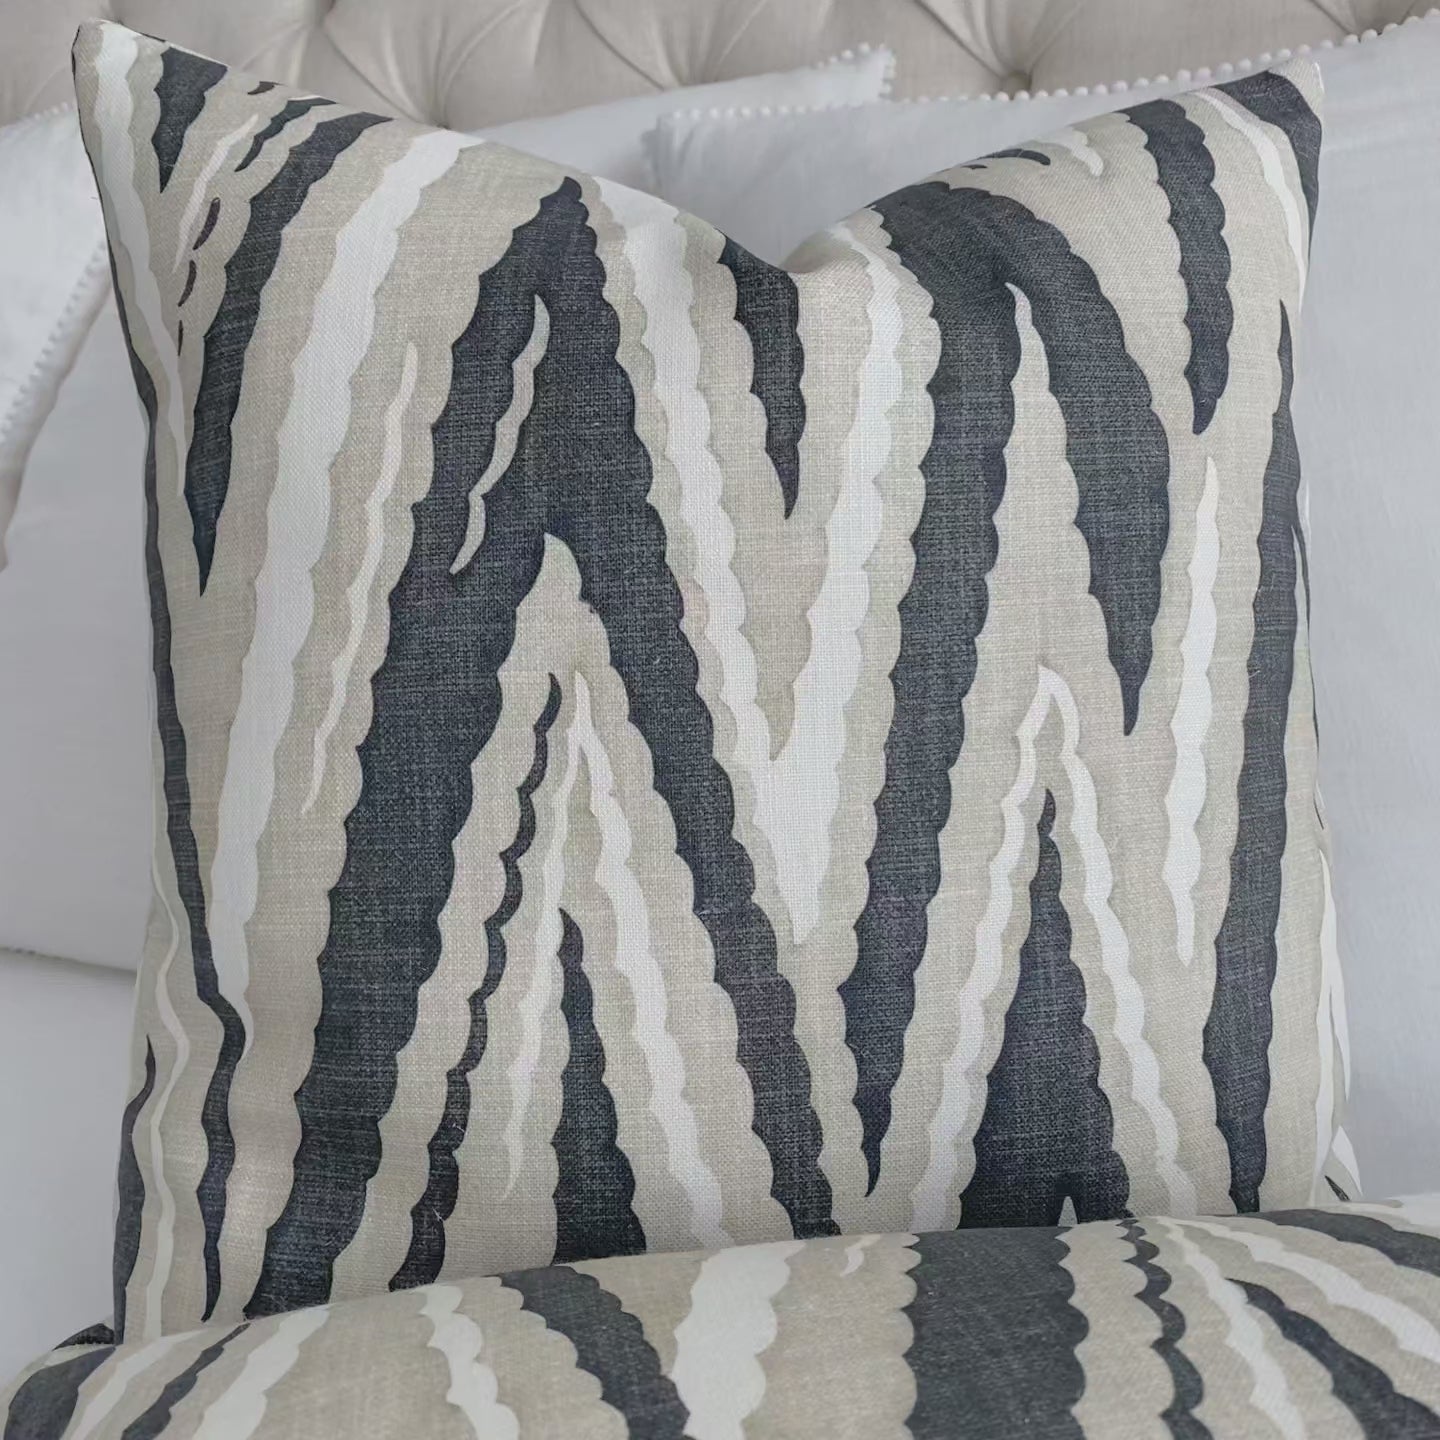 Thibaut Anna French Highland Peak Black Printed Chevron Linen Decorative Throw Pillow Cover Product Video